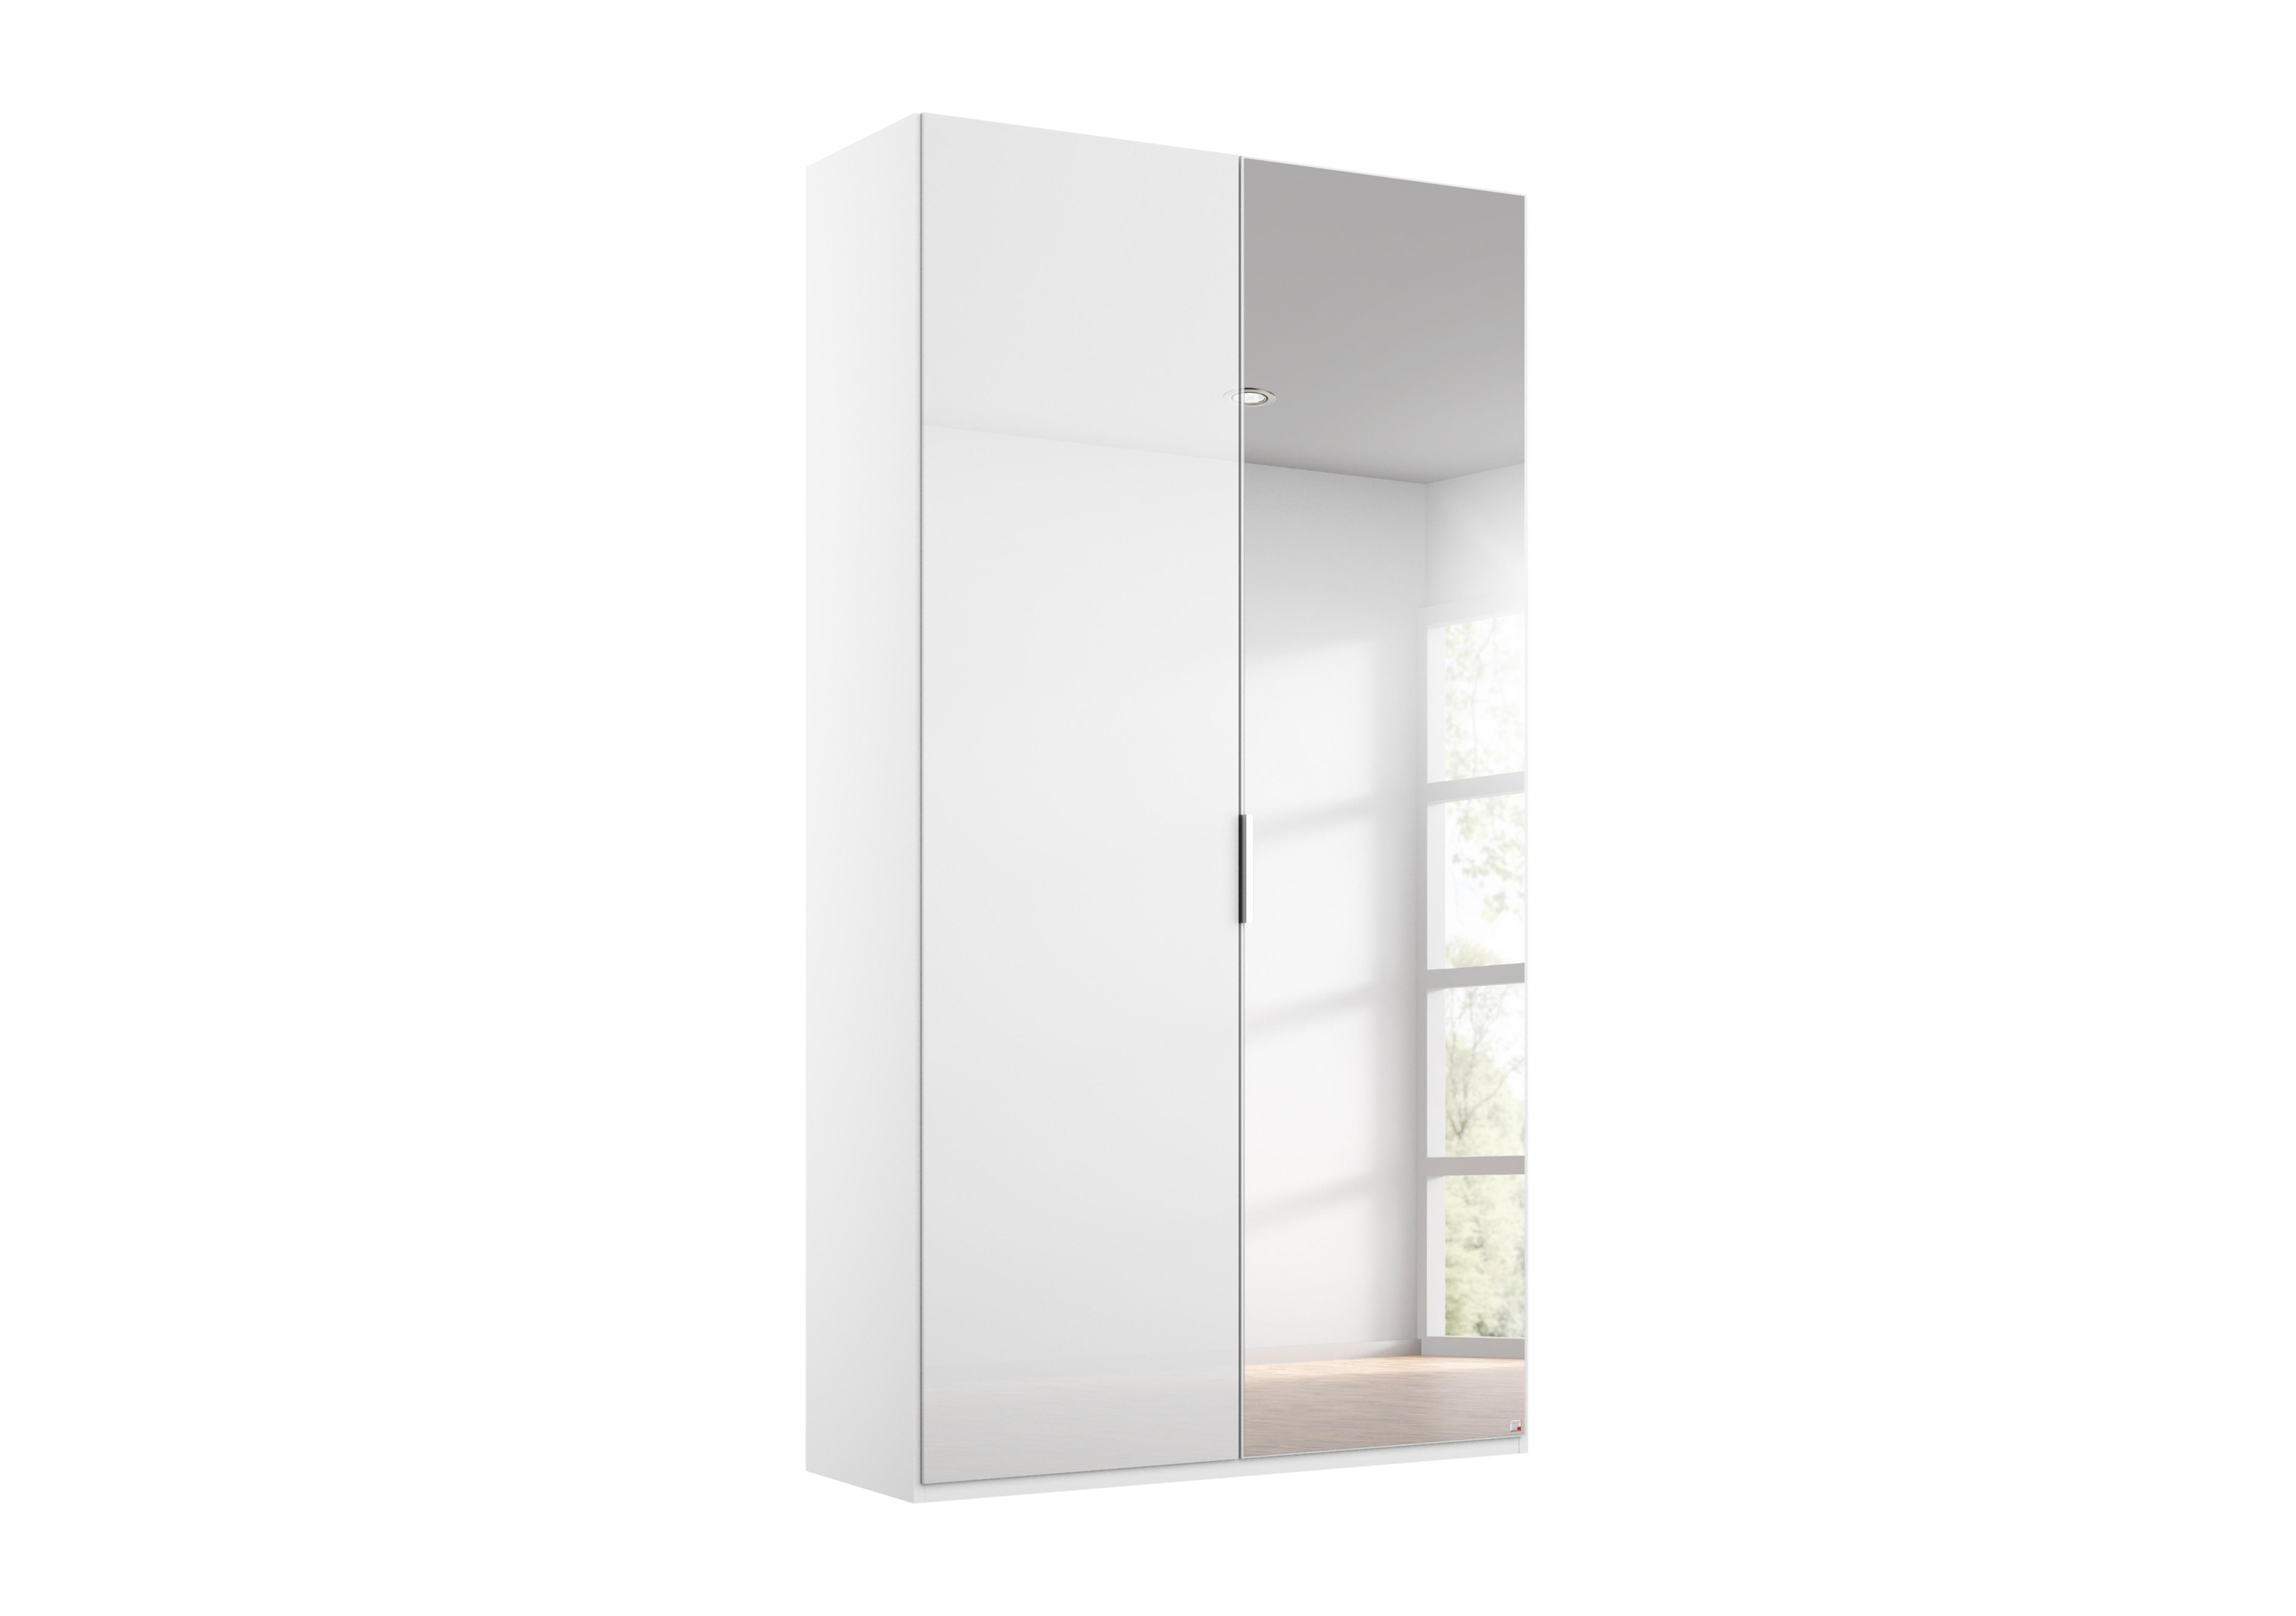 Formes Glass 2 Door Hinged Wardrobe with 1 Mirror in A131b White White Front on Furniture Village